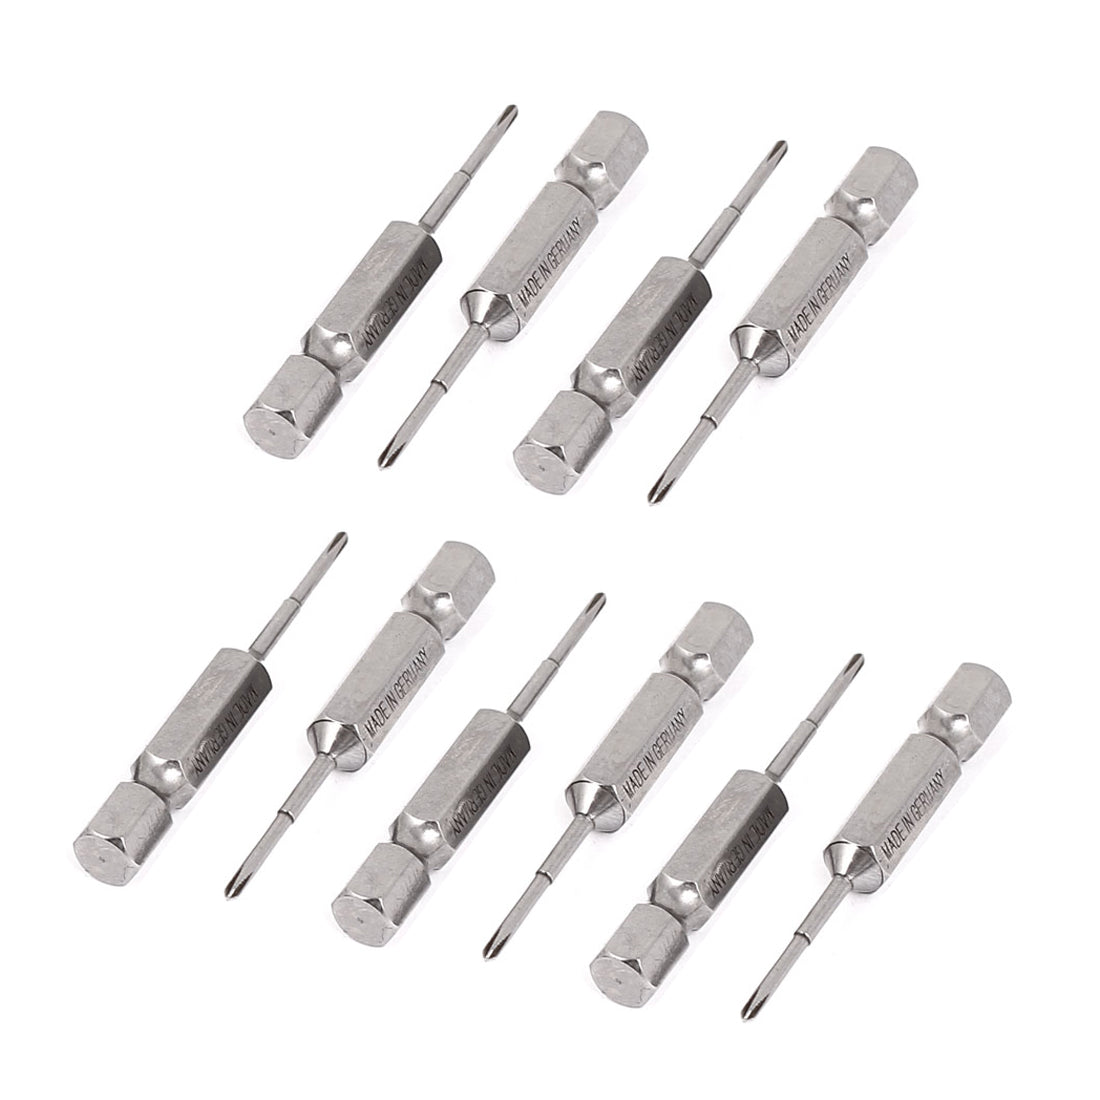 uxcell Uxcell 10pcs 1/4" Hex Shank PH00 1.6mm Tip Magnetic S2 Steel Phillips Screwdriver Bits